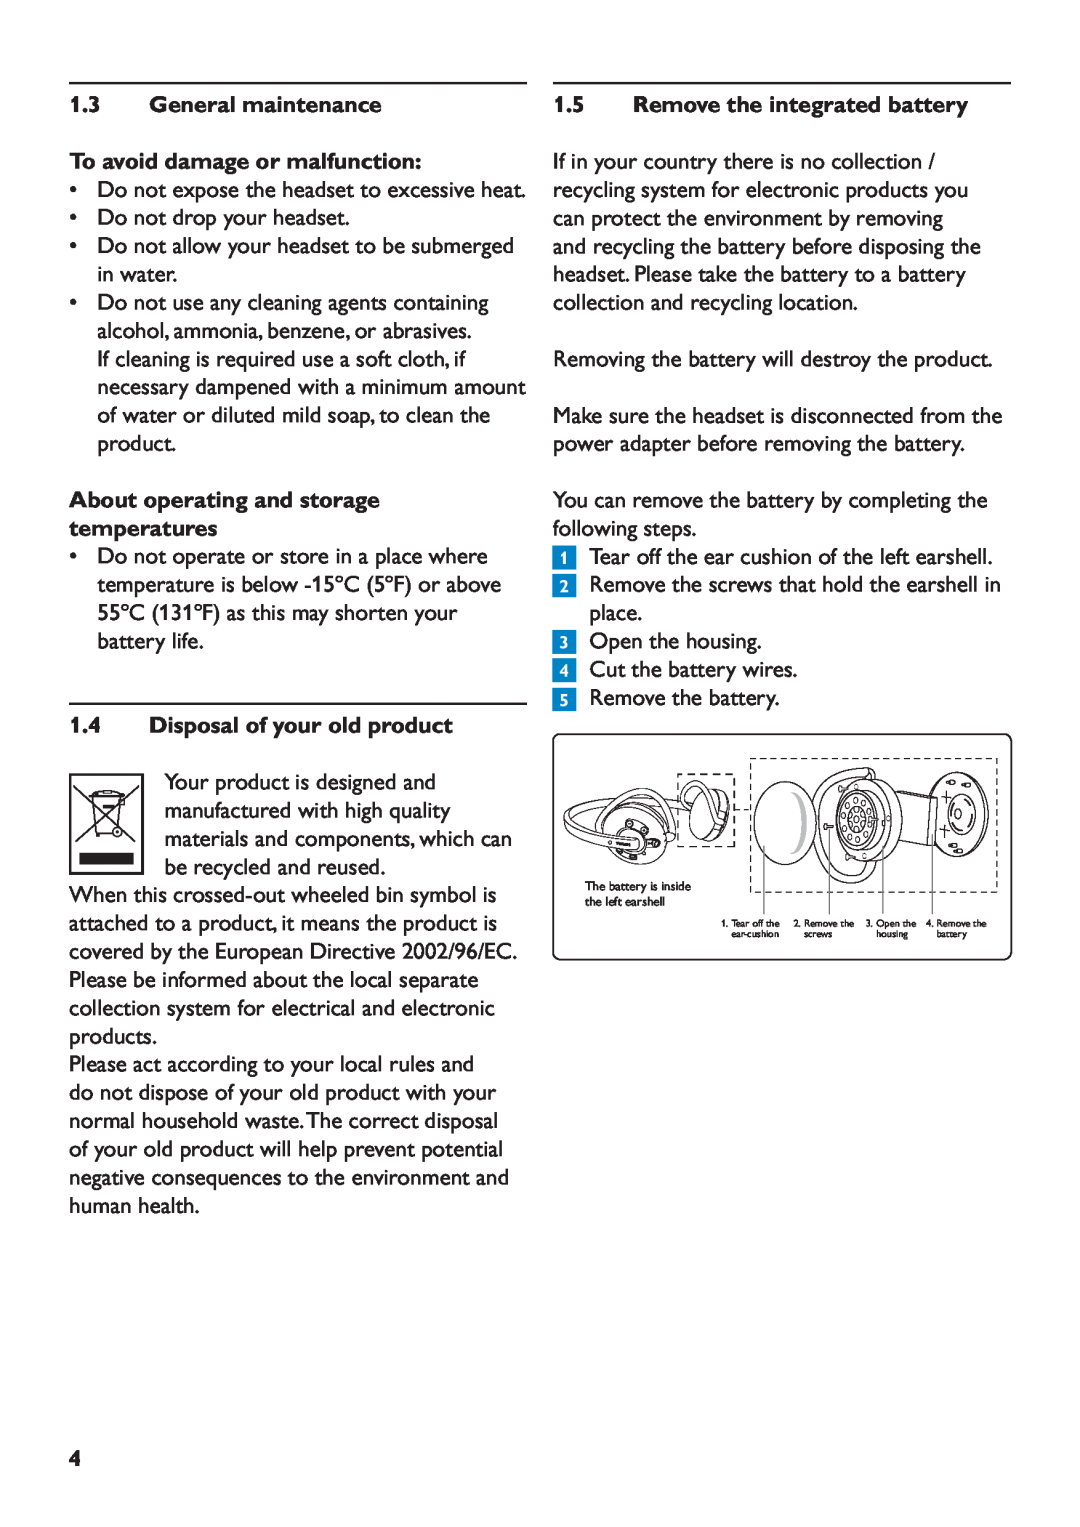 Philips SHB6111 manual 1.3General maintenance, To avoid damage or malfunction, About operating and storage temperatures 